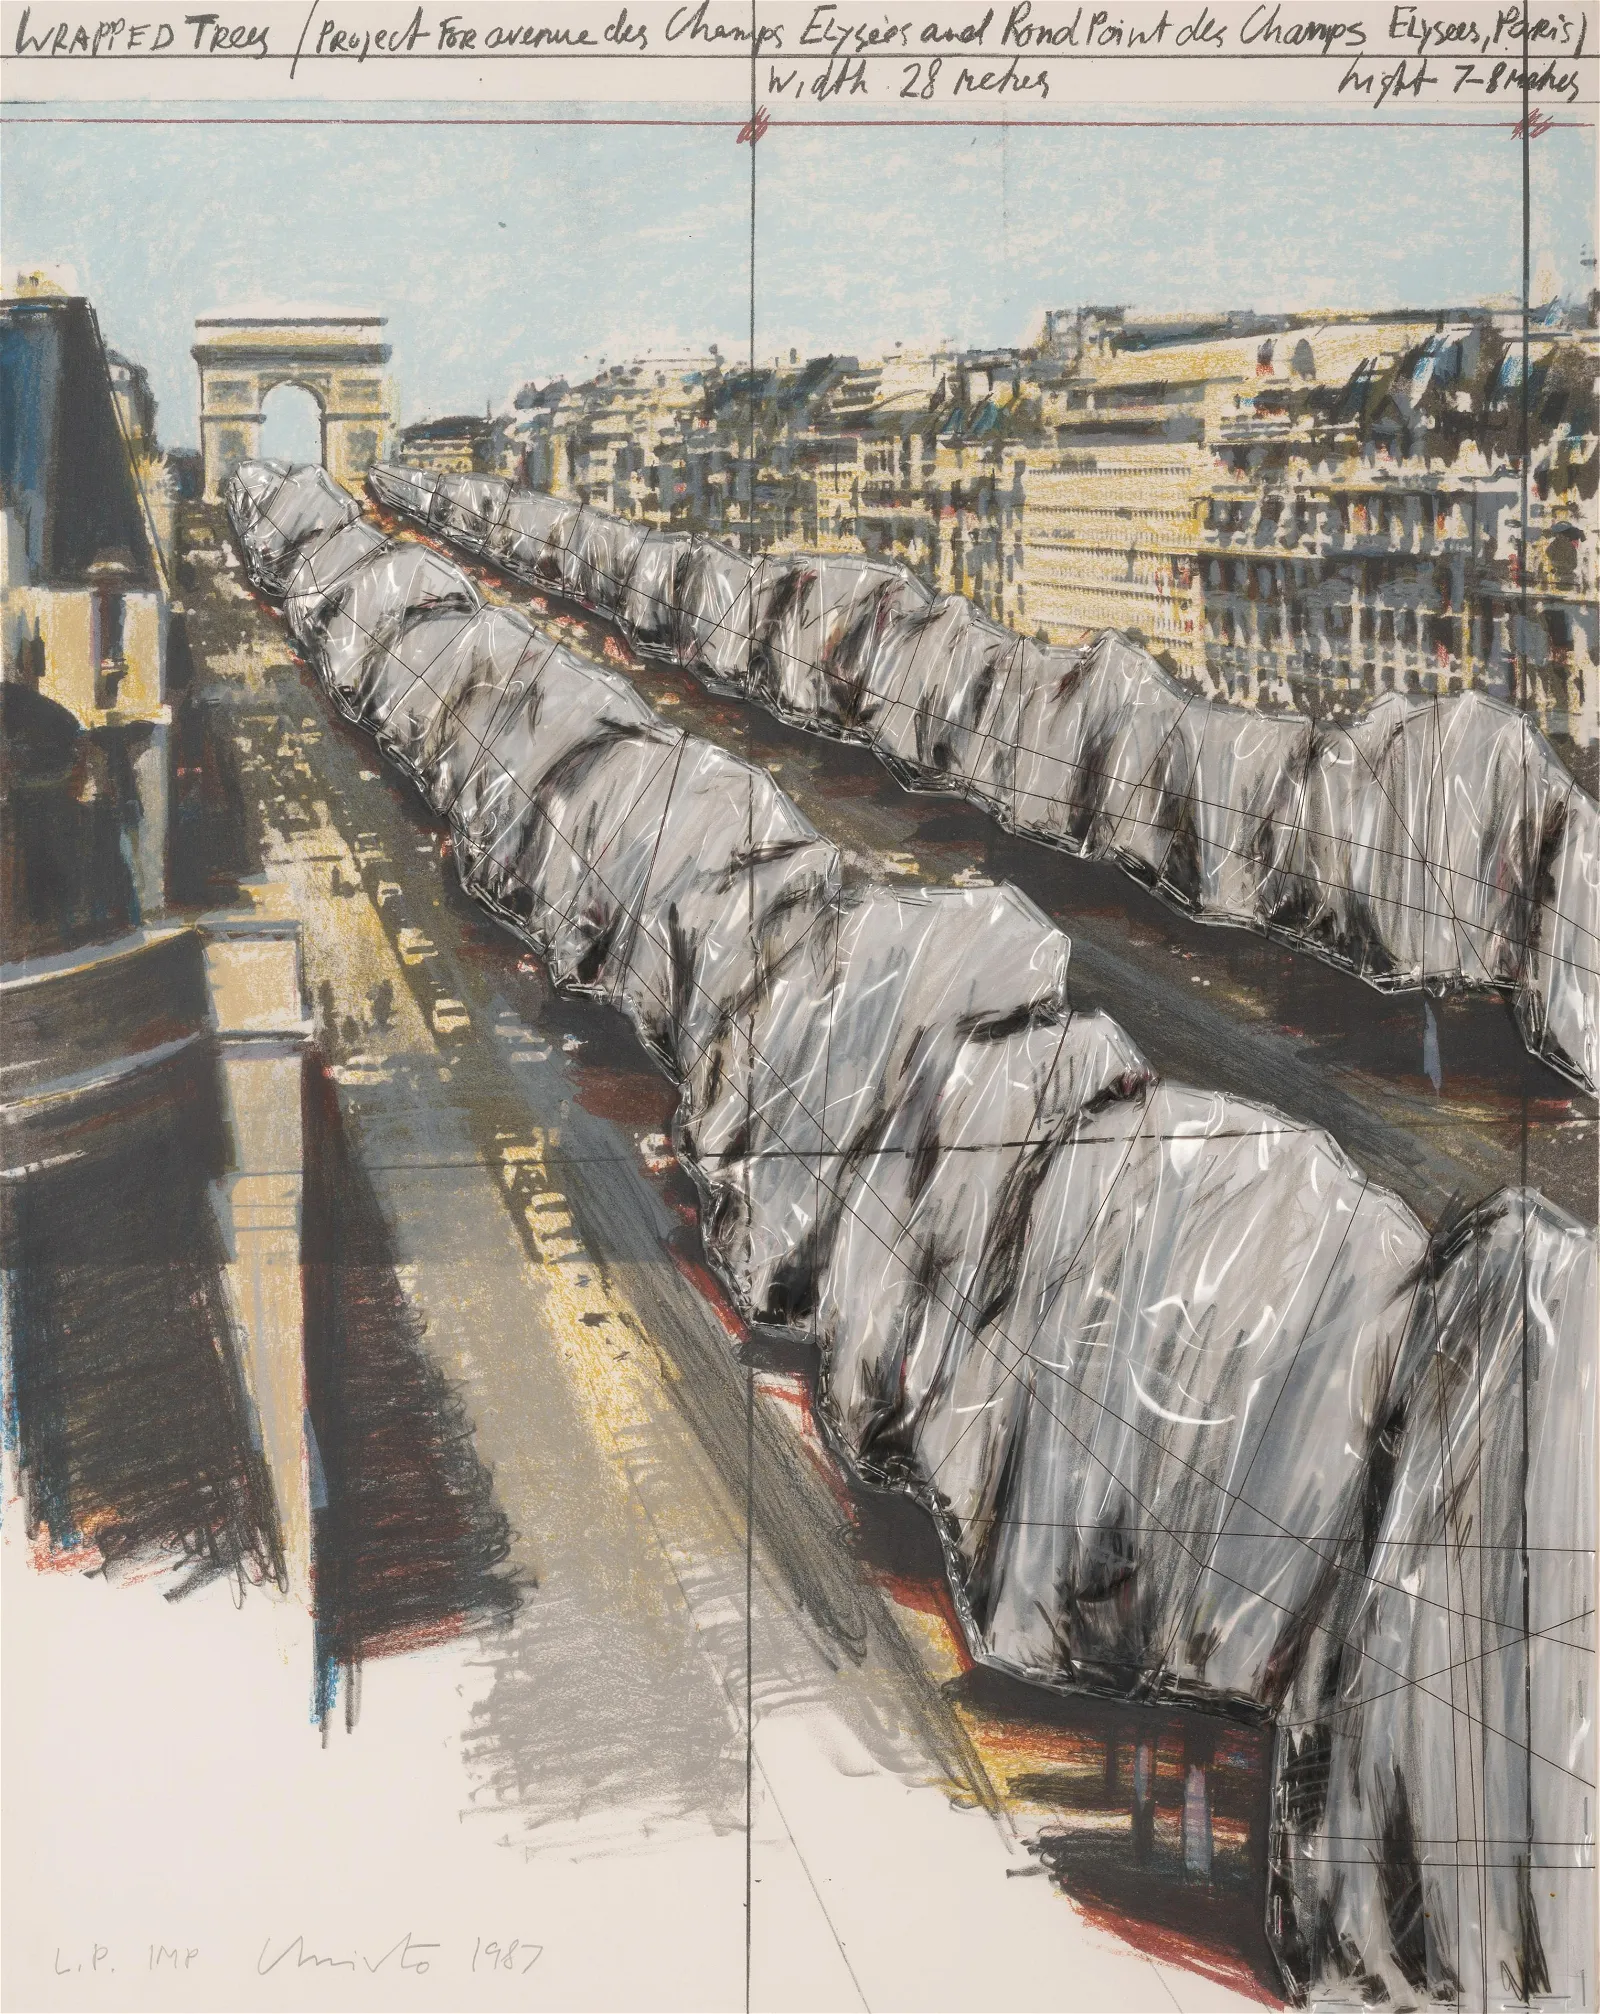 Wrapped Trees, Project for the Avenue des Champs-Elysees, Paris, 1987